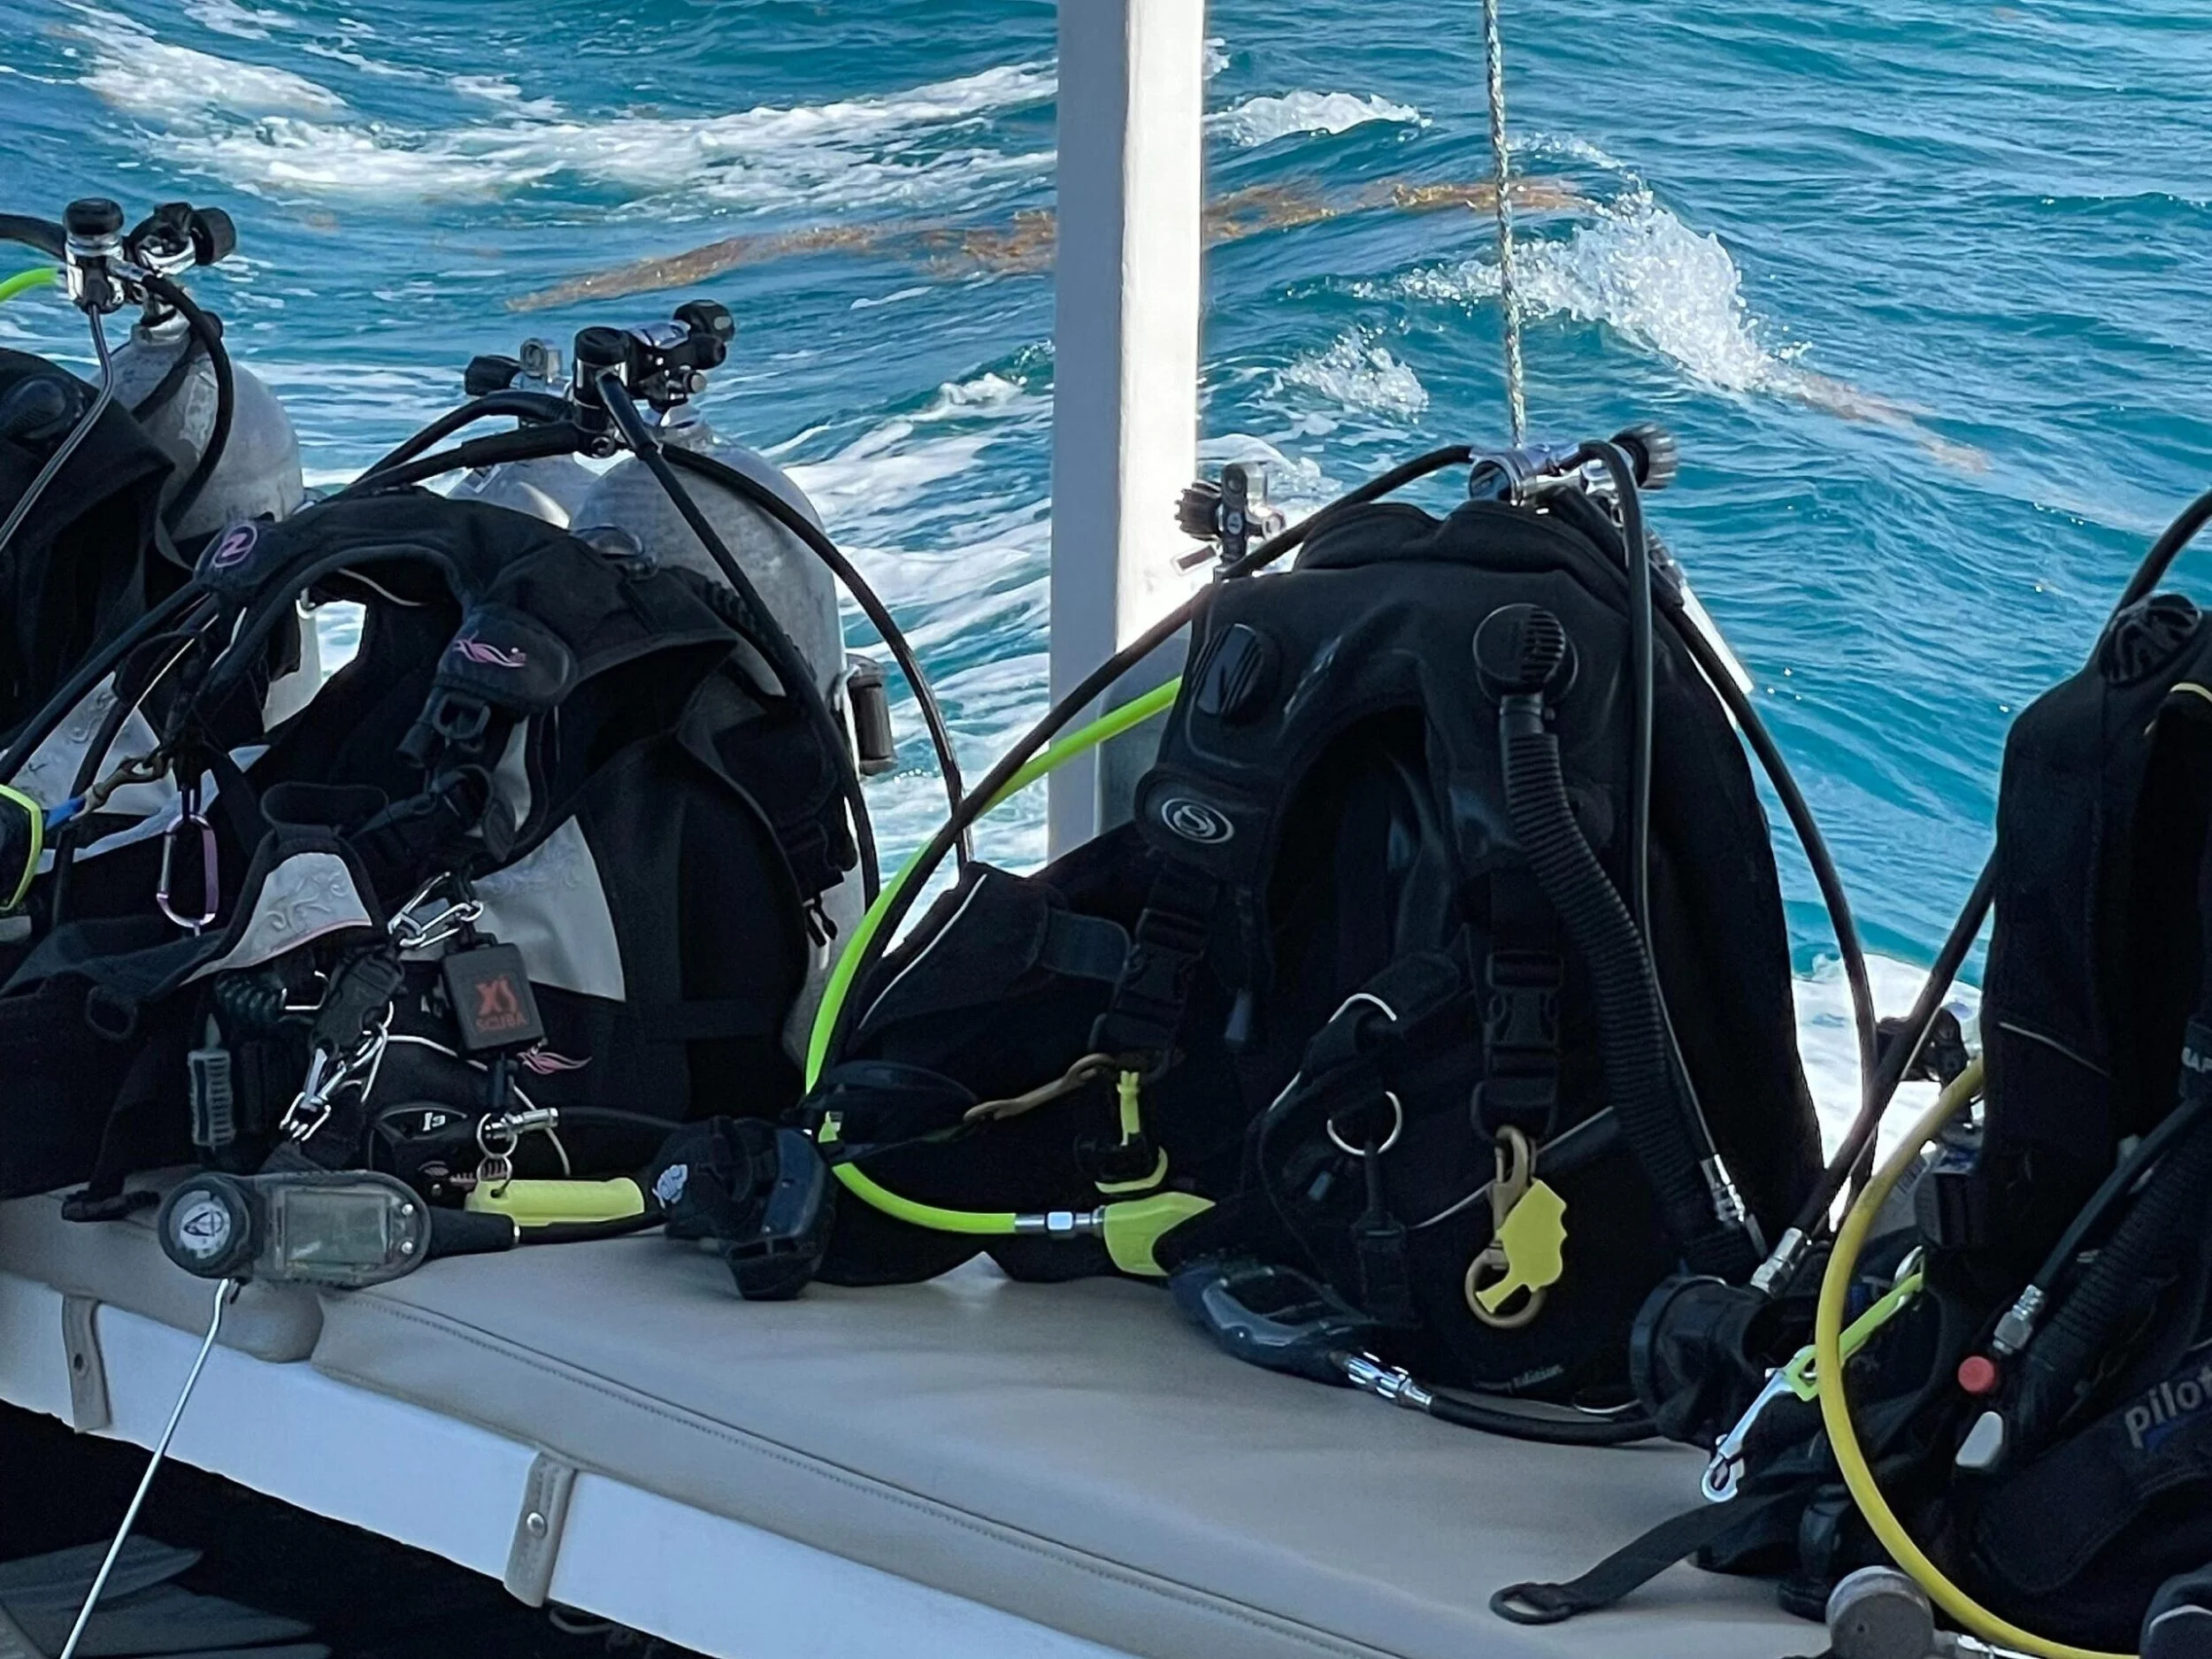 Scuba Gear Ready to Dive on a Boat - Photo By Eileen Byrne